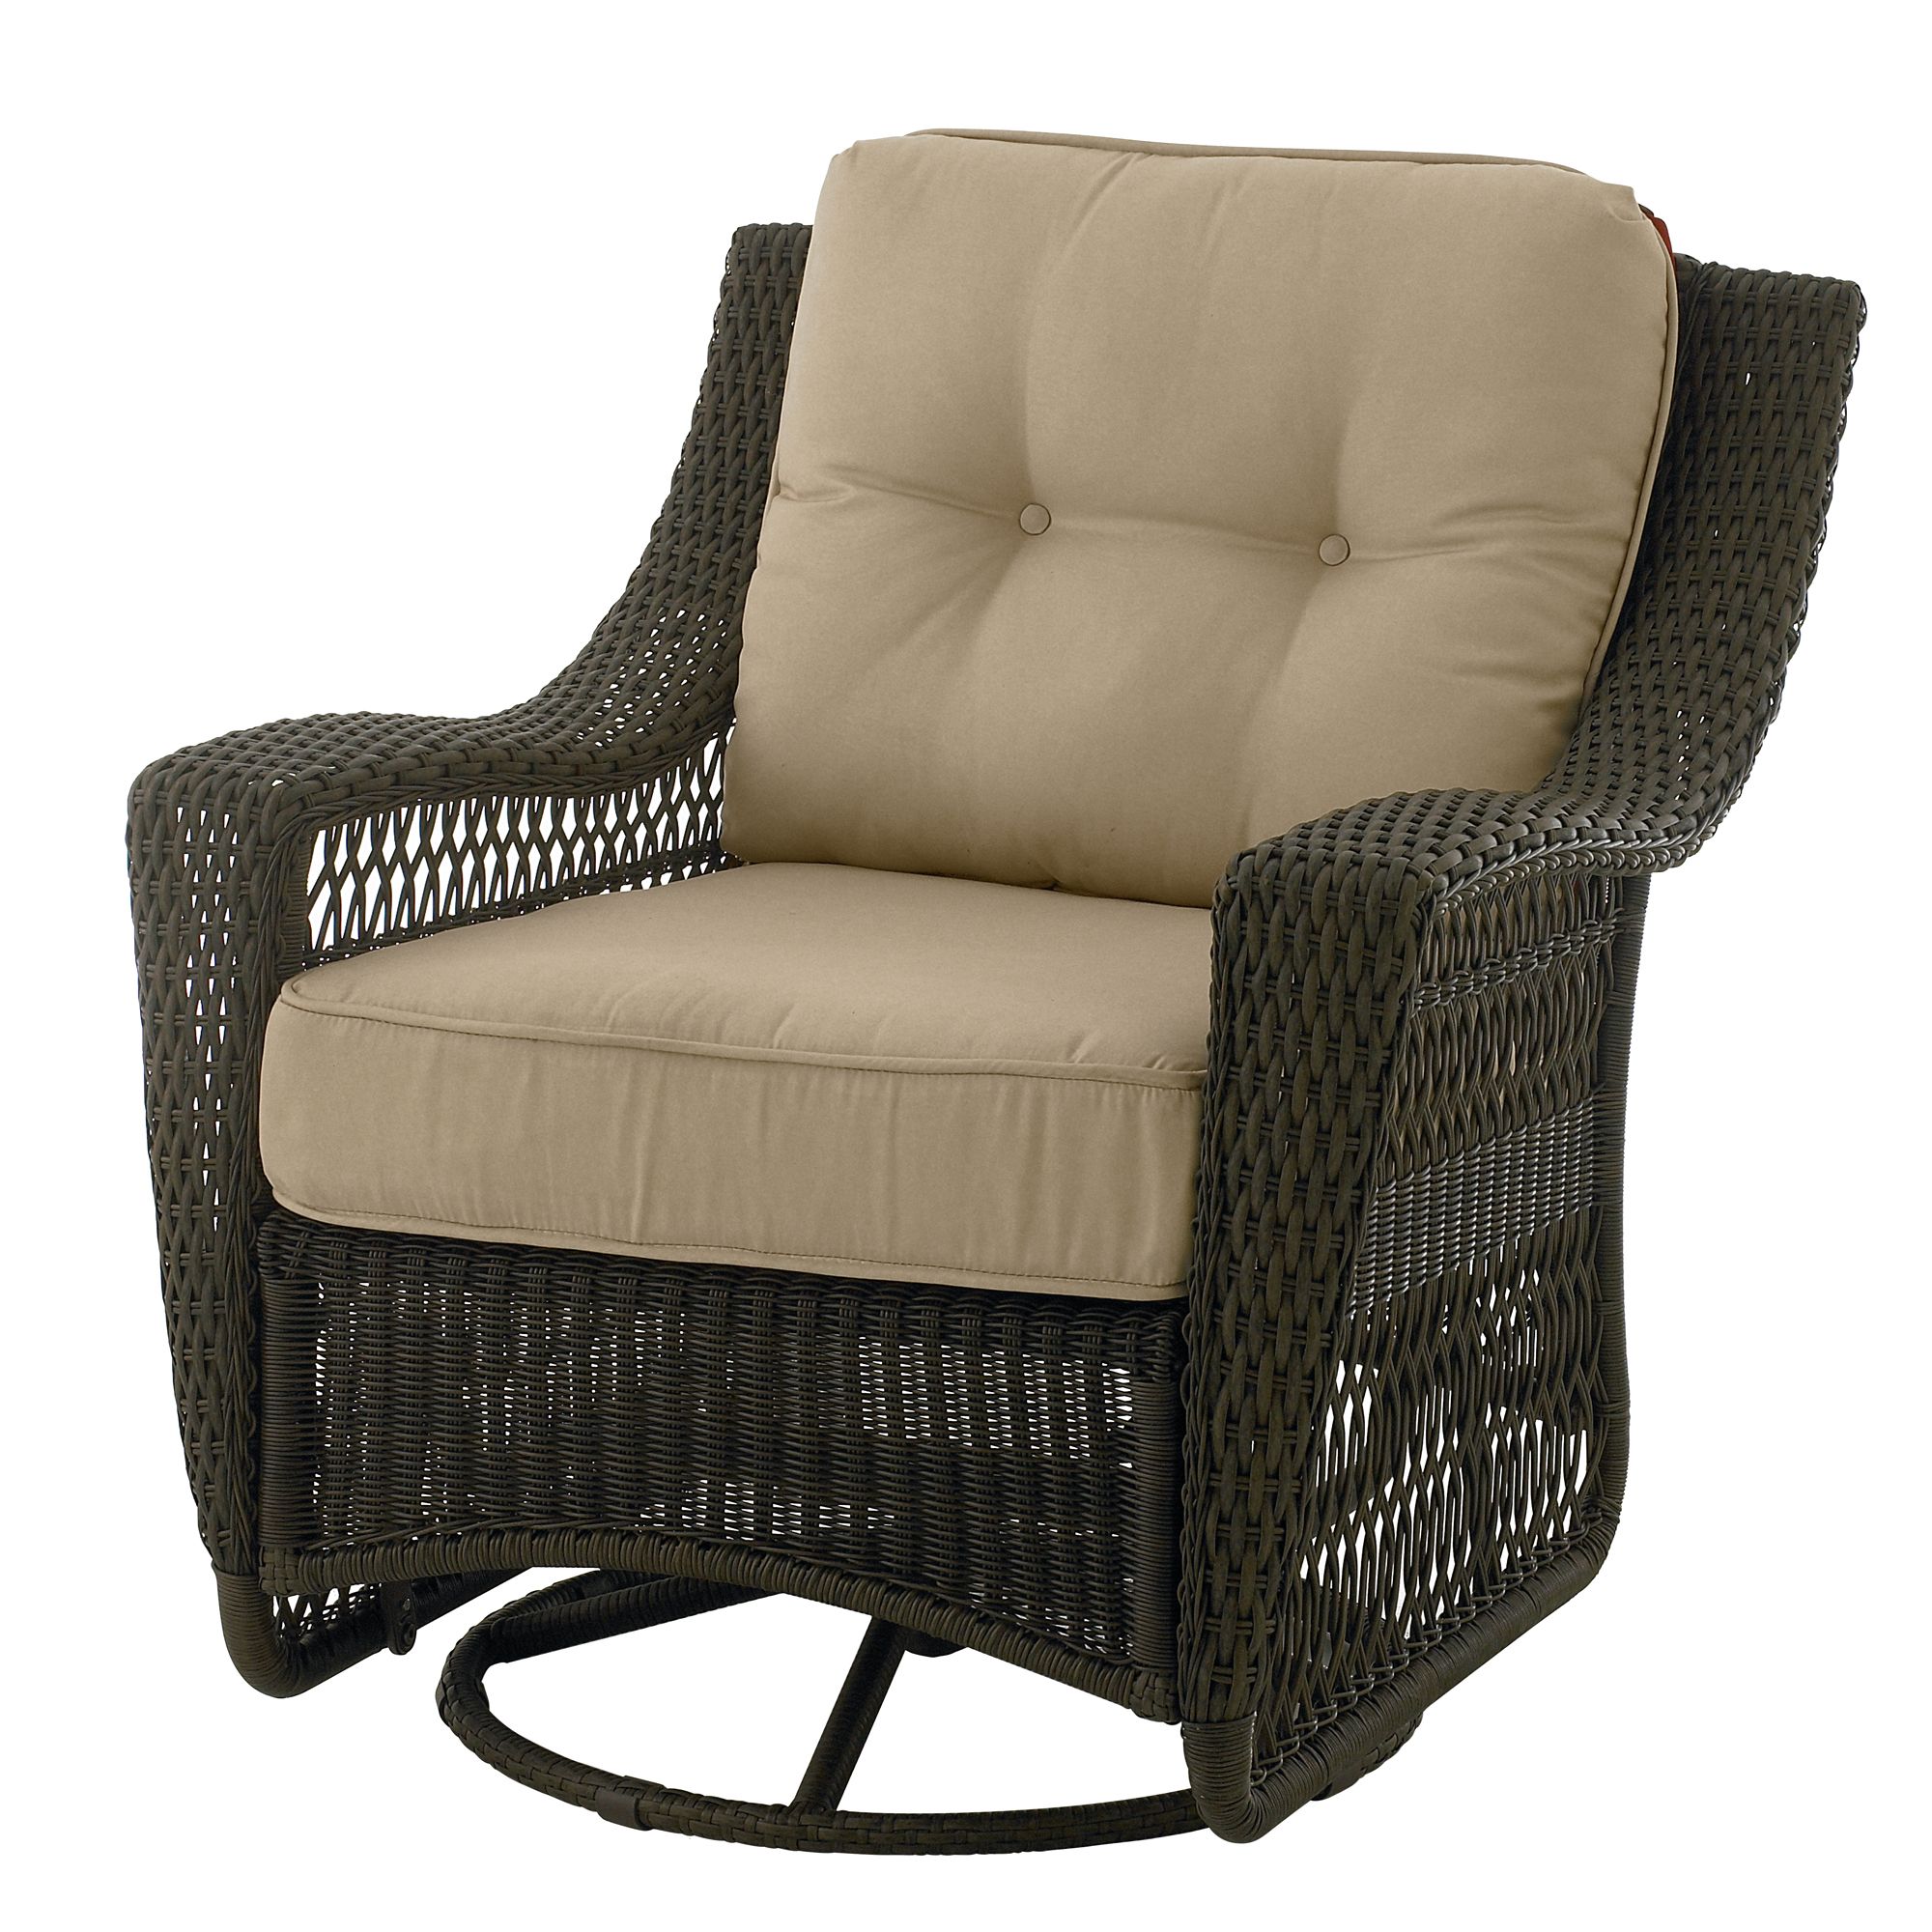 Country Living Concord Swivel Glider Patio Chair